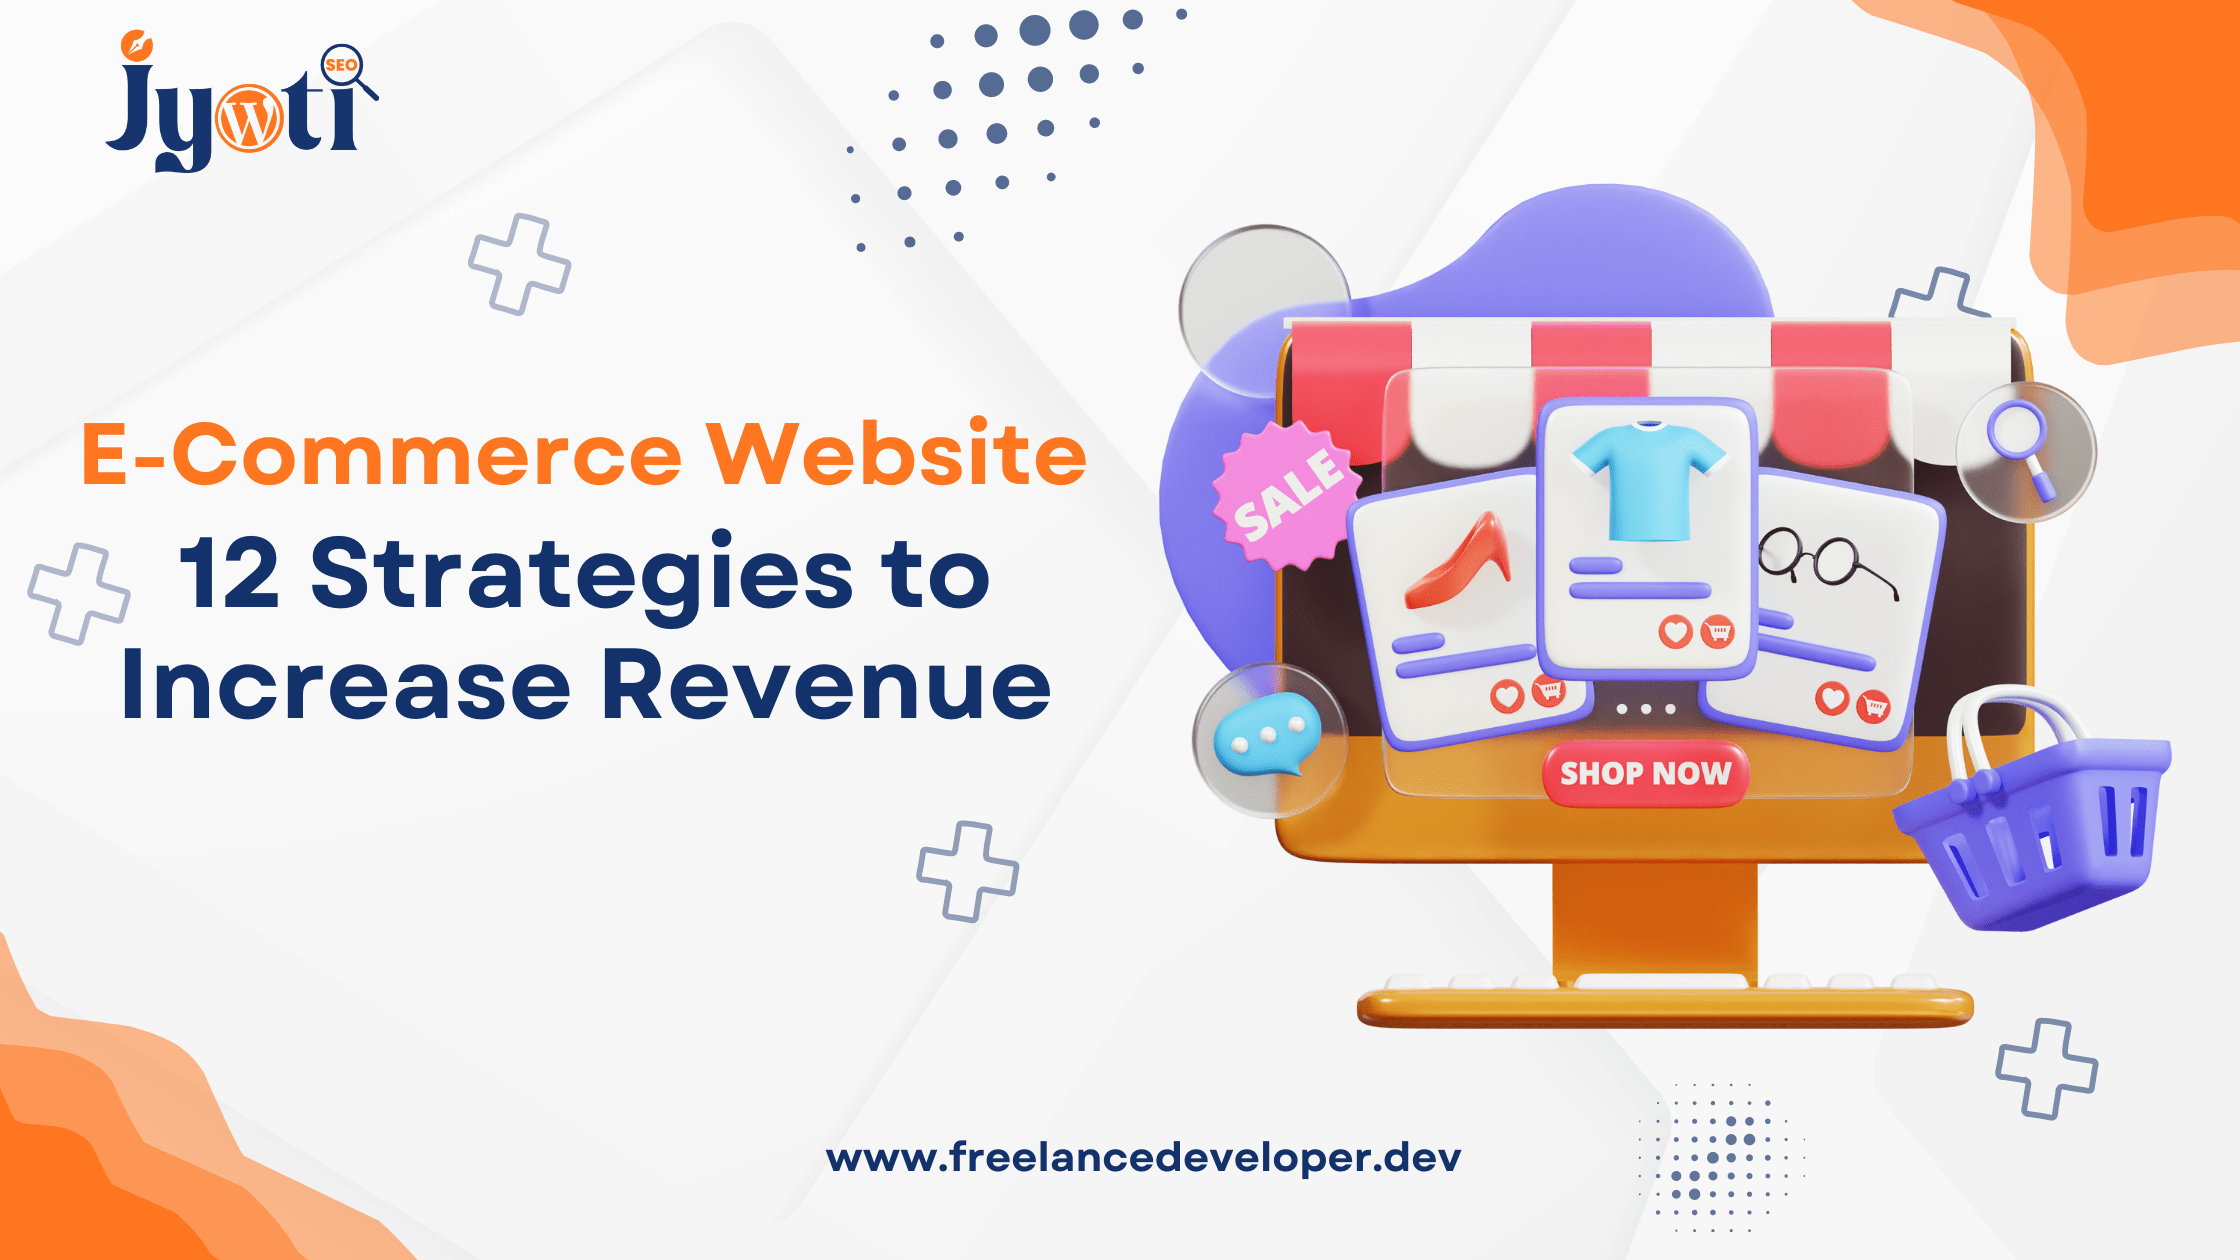 Optimizing your E-Commerce Website: 12 Strategies to Increase Revenue